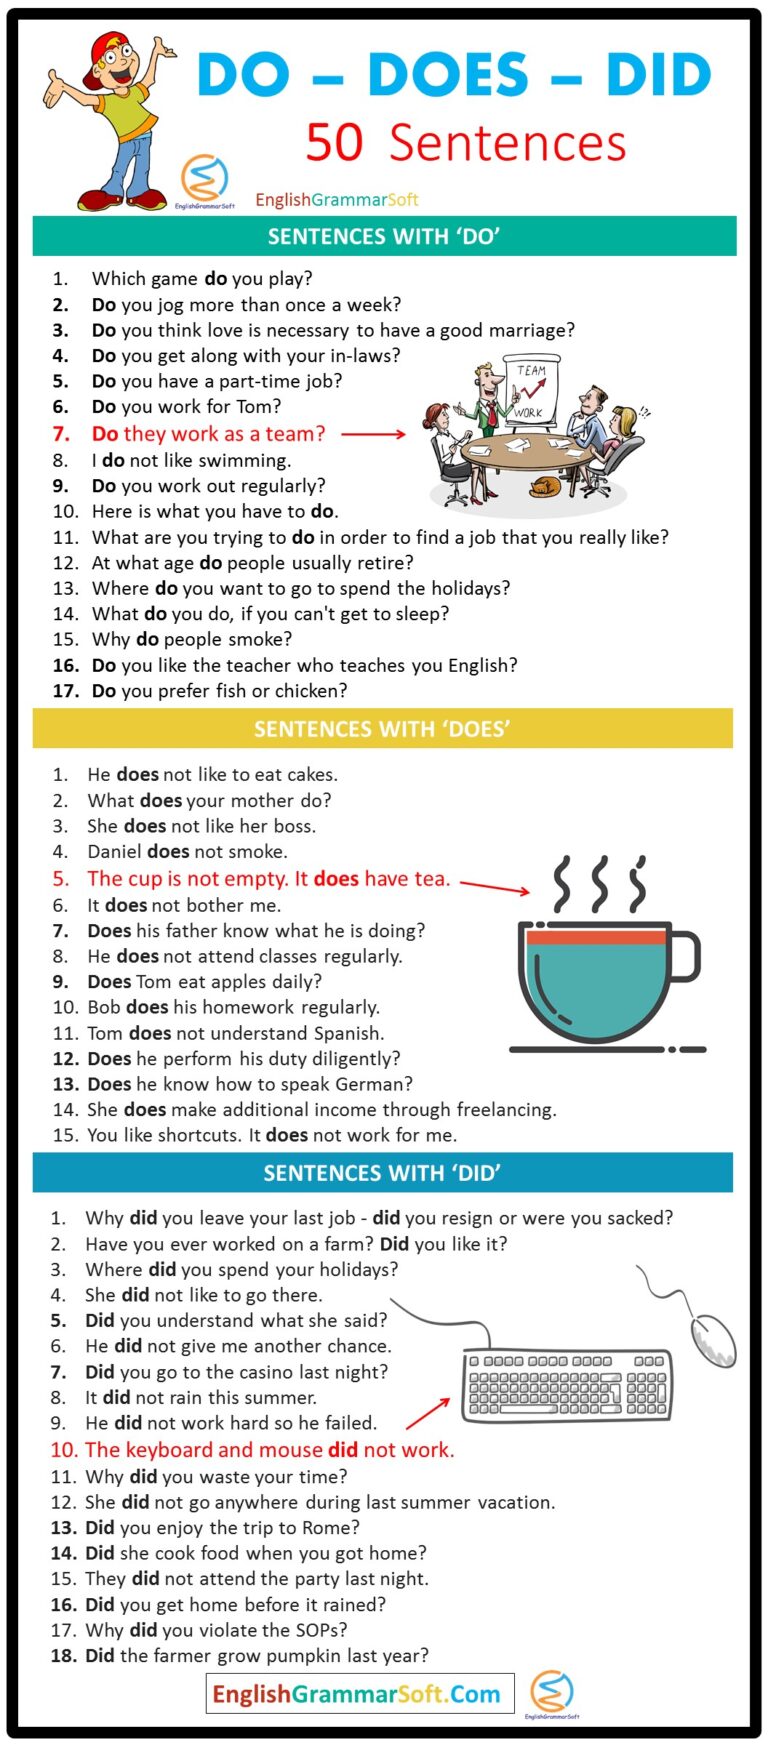 do-does-did-sentences-50-examples-englishgrammarsoft